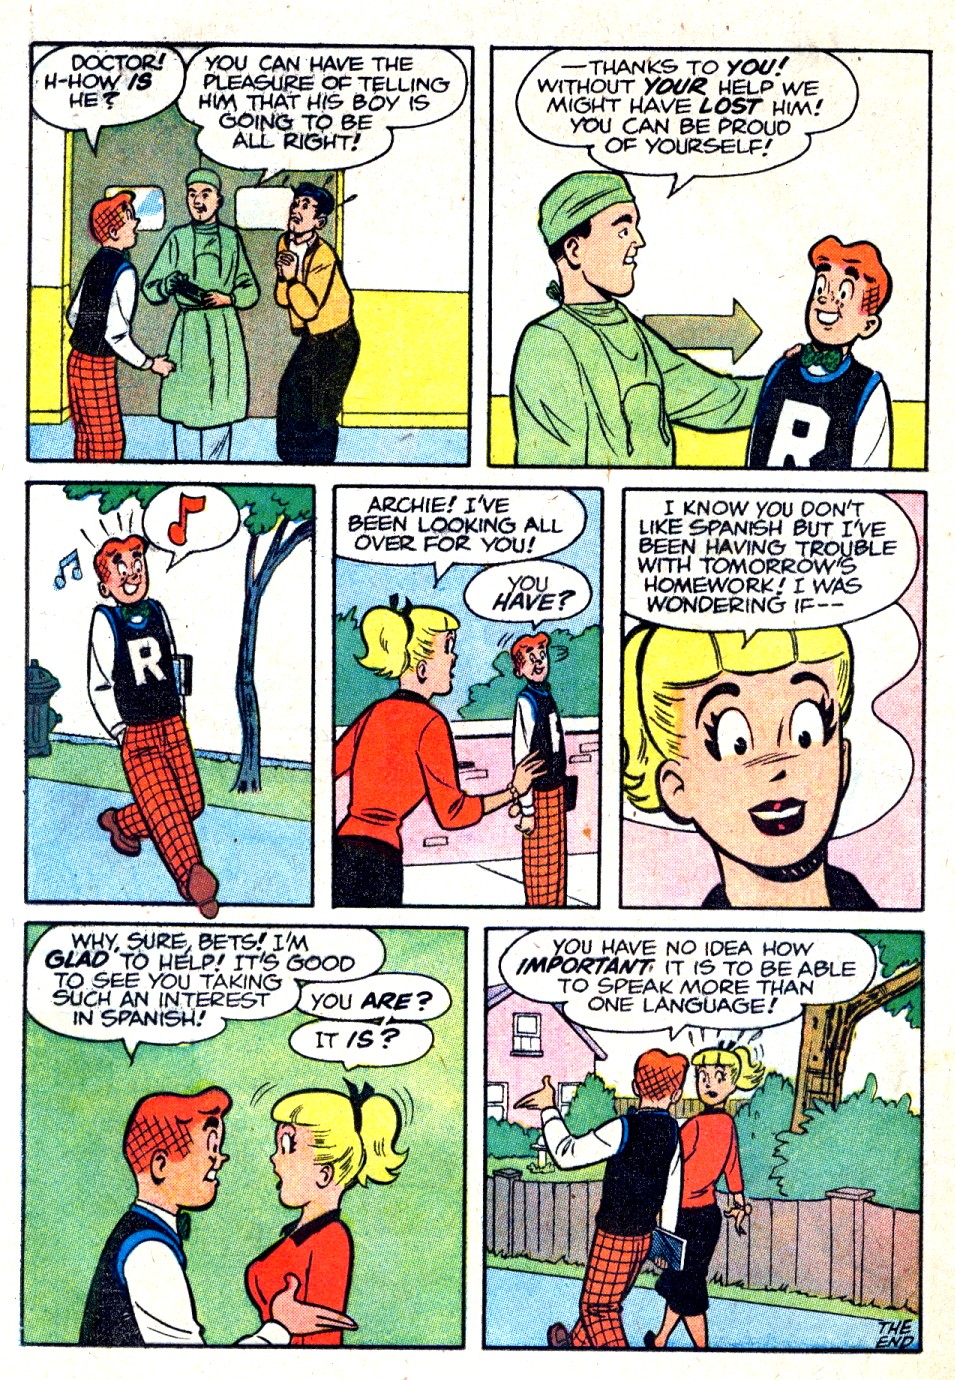 Archie (1960) 114 Page 24